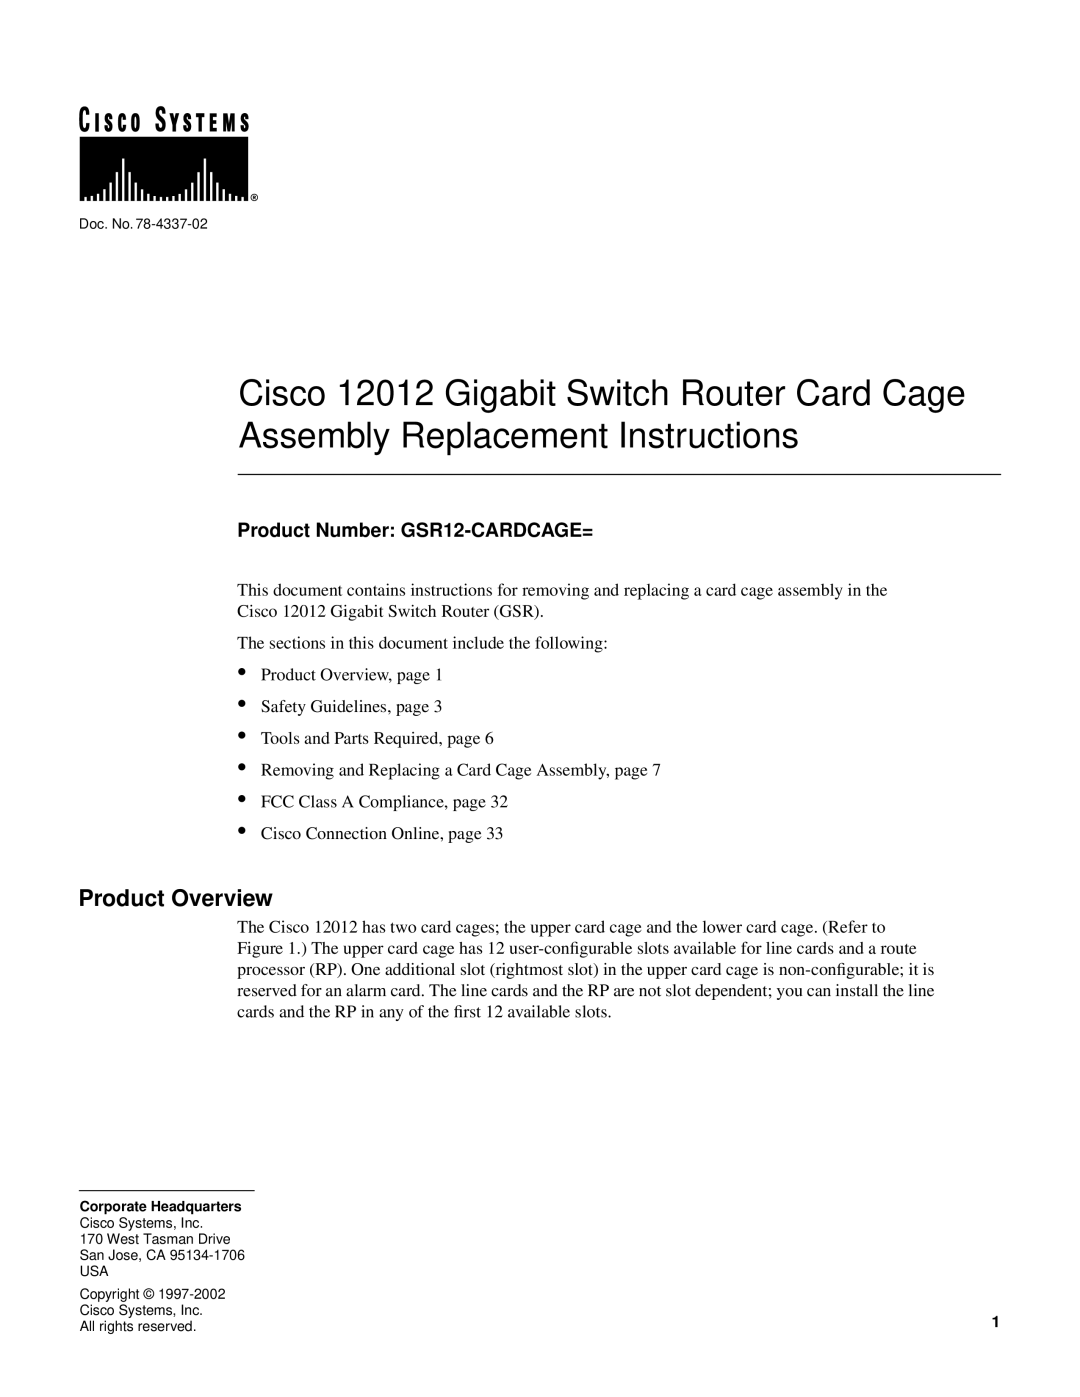 Cisco Systems 12012 manual Product Overview, Product Number GSR12-CARDCAGE= 